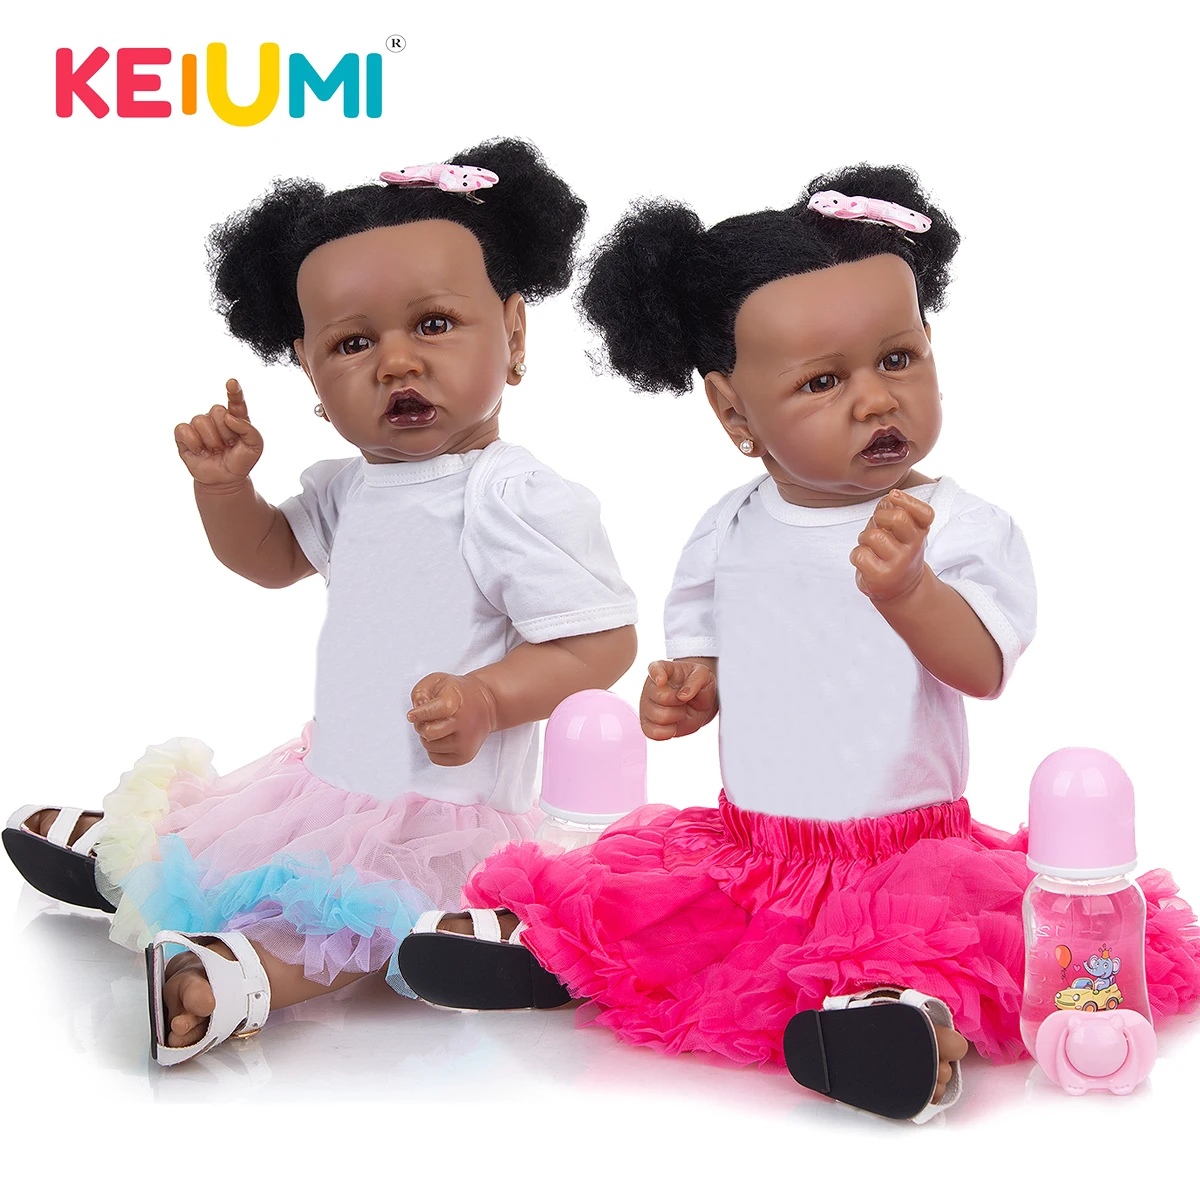 

KEIUMI 57 CM Dress Up Reborn Baby Dolls Full Body Silicone Vinyl Fast Delivery For Christmas Gift Children Birthday Surprise